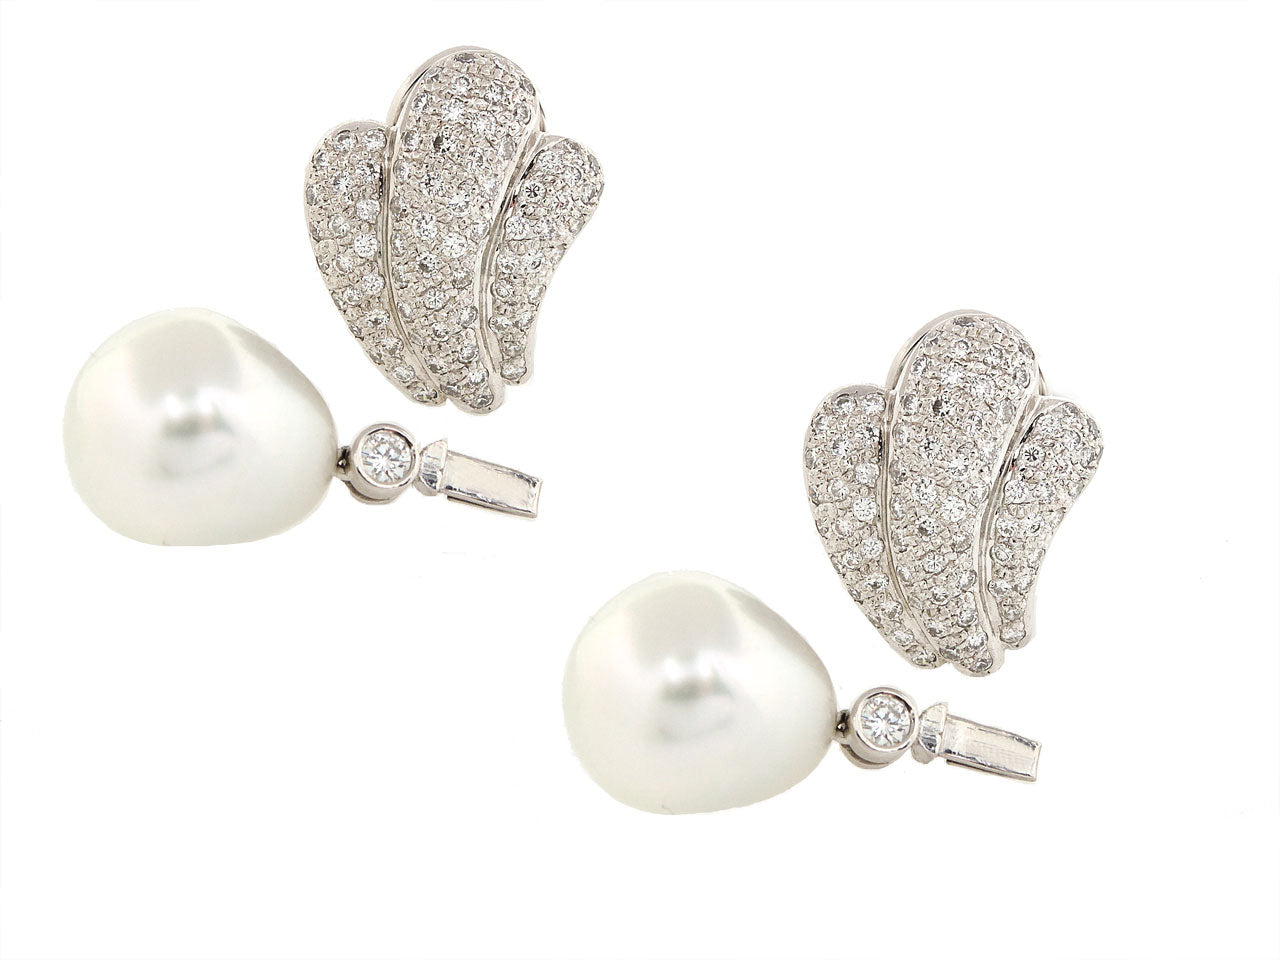 Baroque Pearl and Diamond Earrings in 18K White Gold